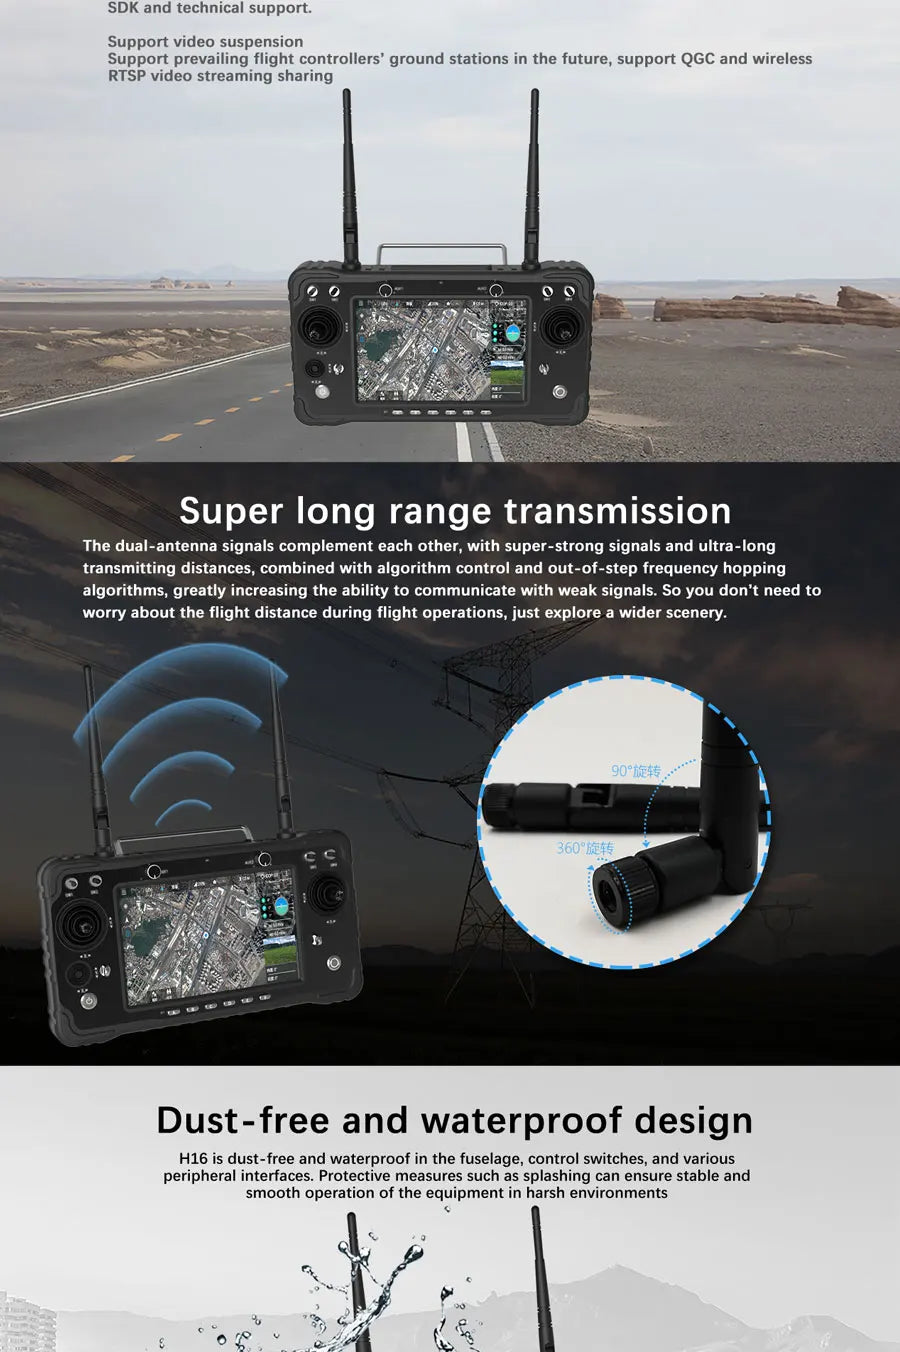 prevailing flight controllers' ground stations in the future, support wireless RTSP video streaming